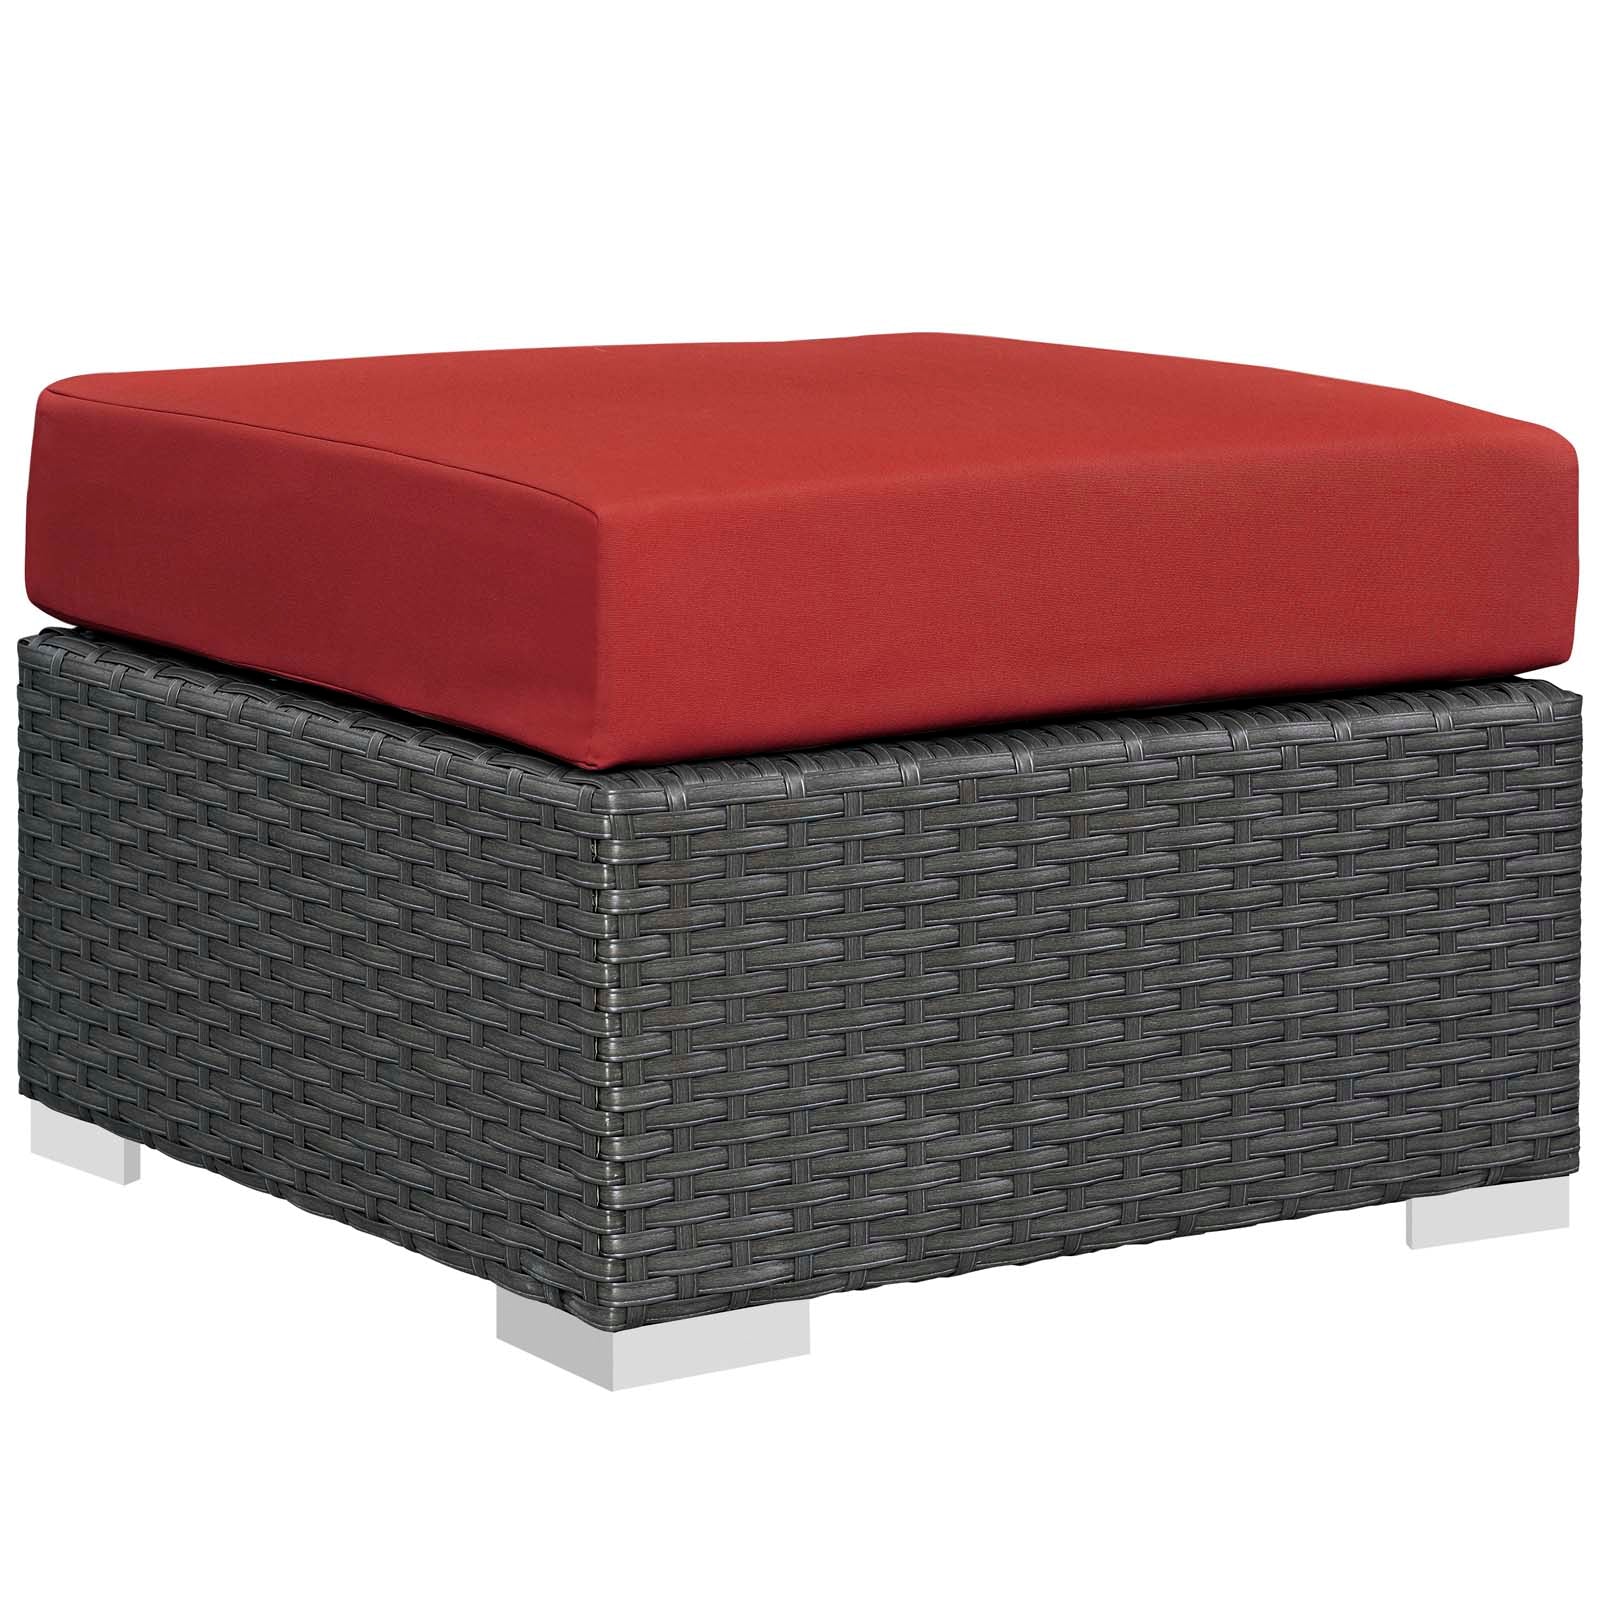 Modway Outdoor Conversation Sets - Sojourn 8 Piece Outdoor Patio Sunbrella Sectional Set Canvas Red